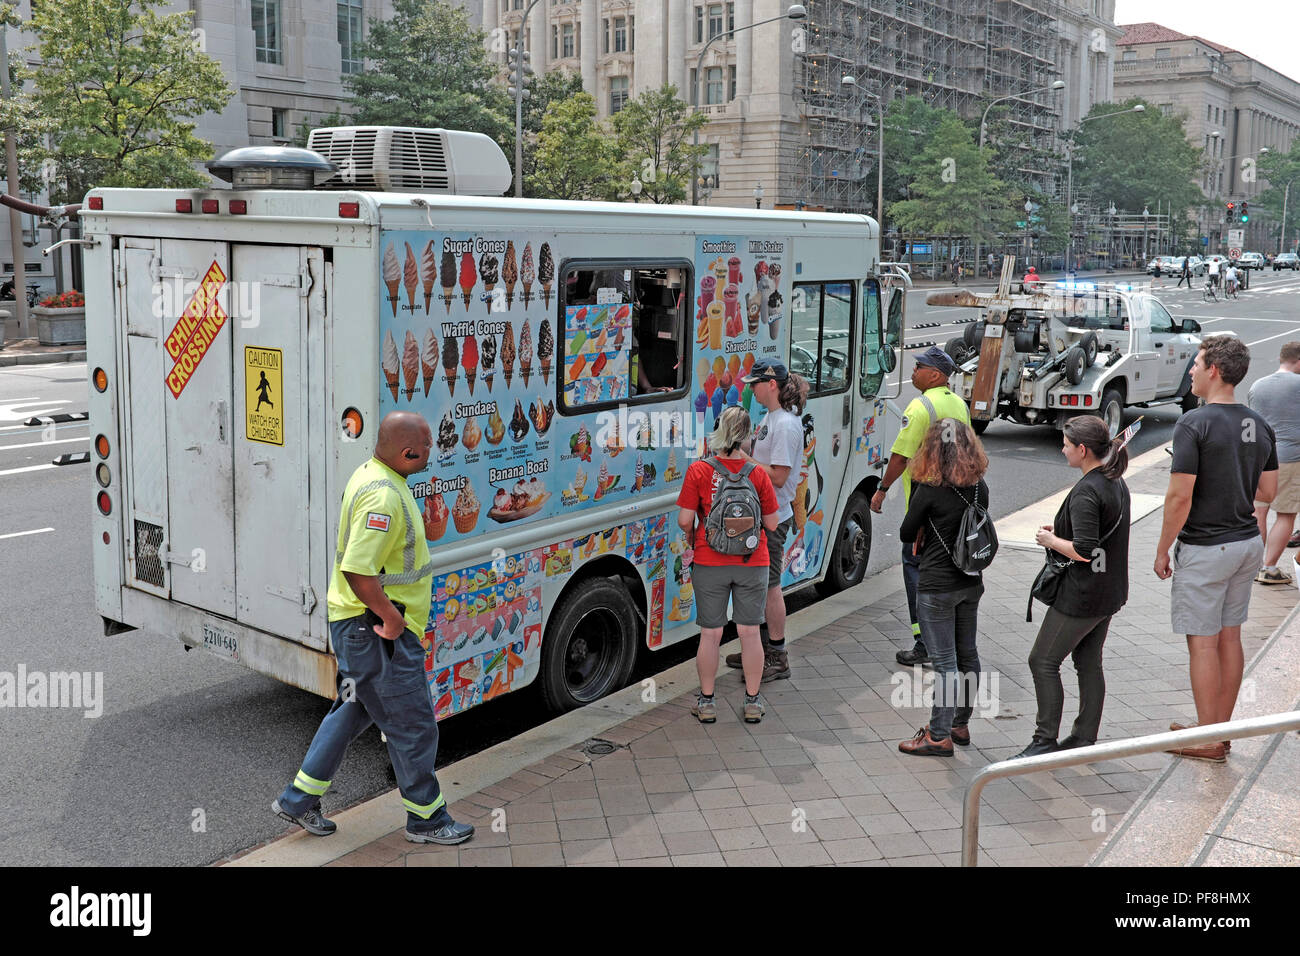 Hot weather in Washington DC in August draws people to the ice cream truck for cooling off. Due to its location, the truck is being cited and towed. Stock Photo